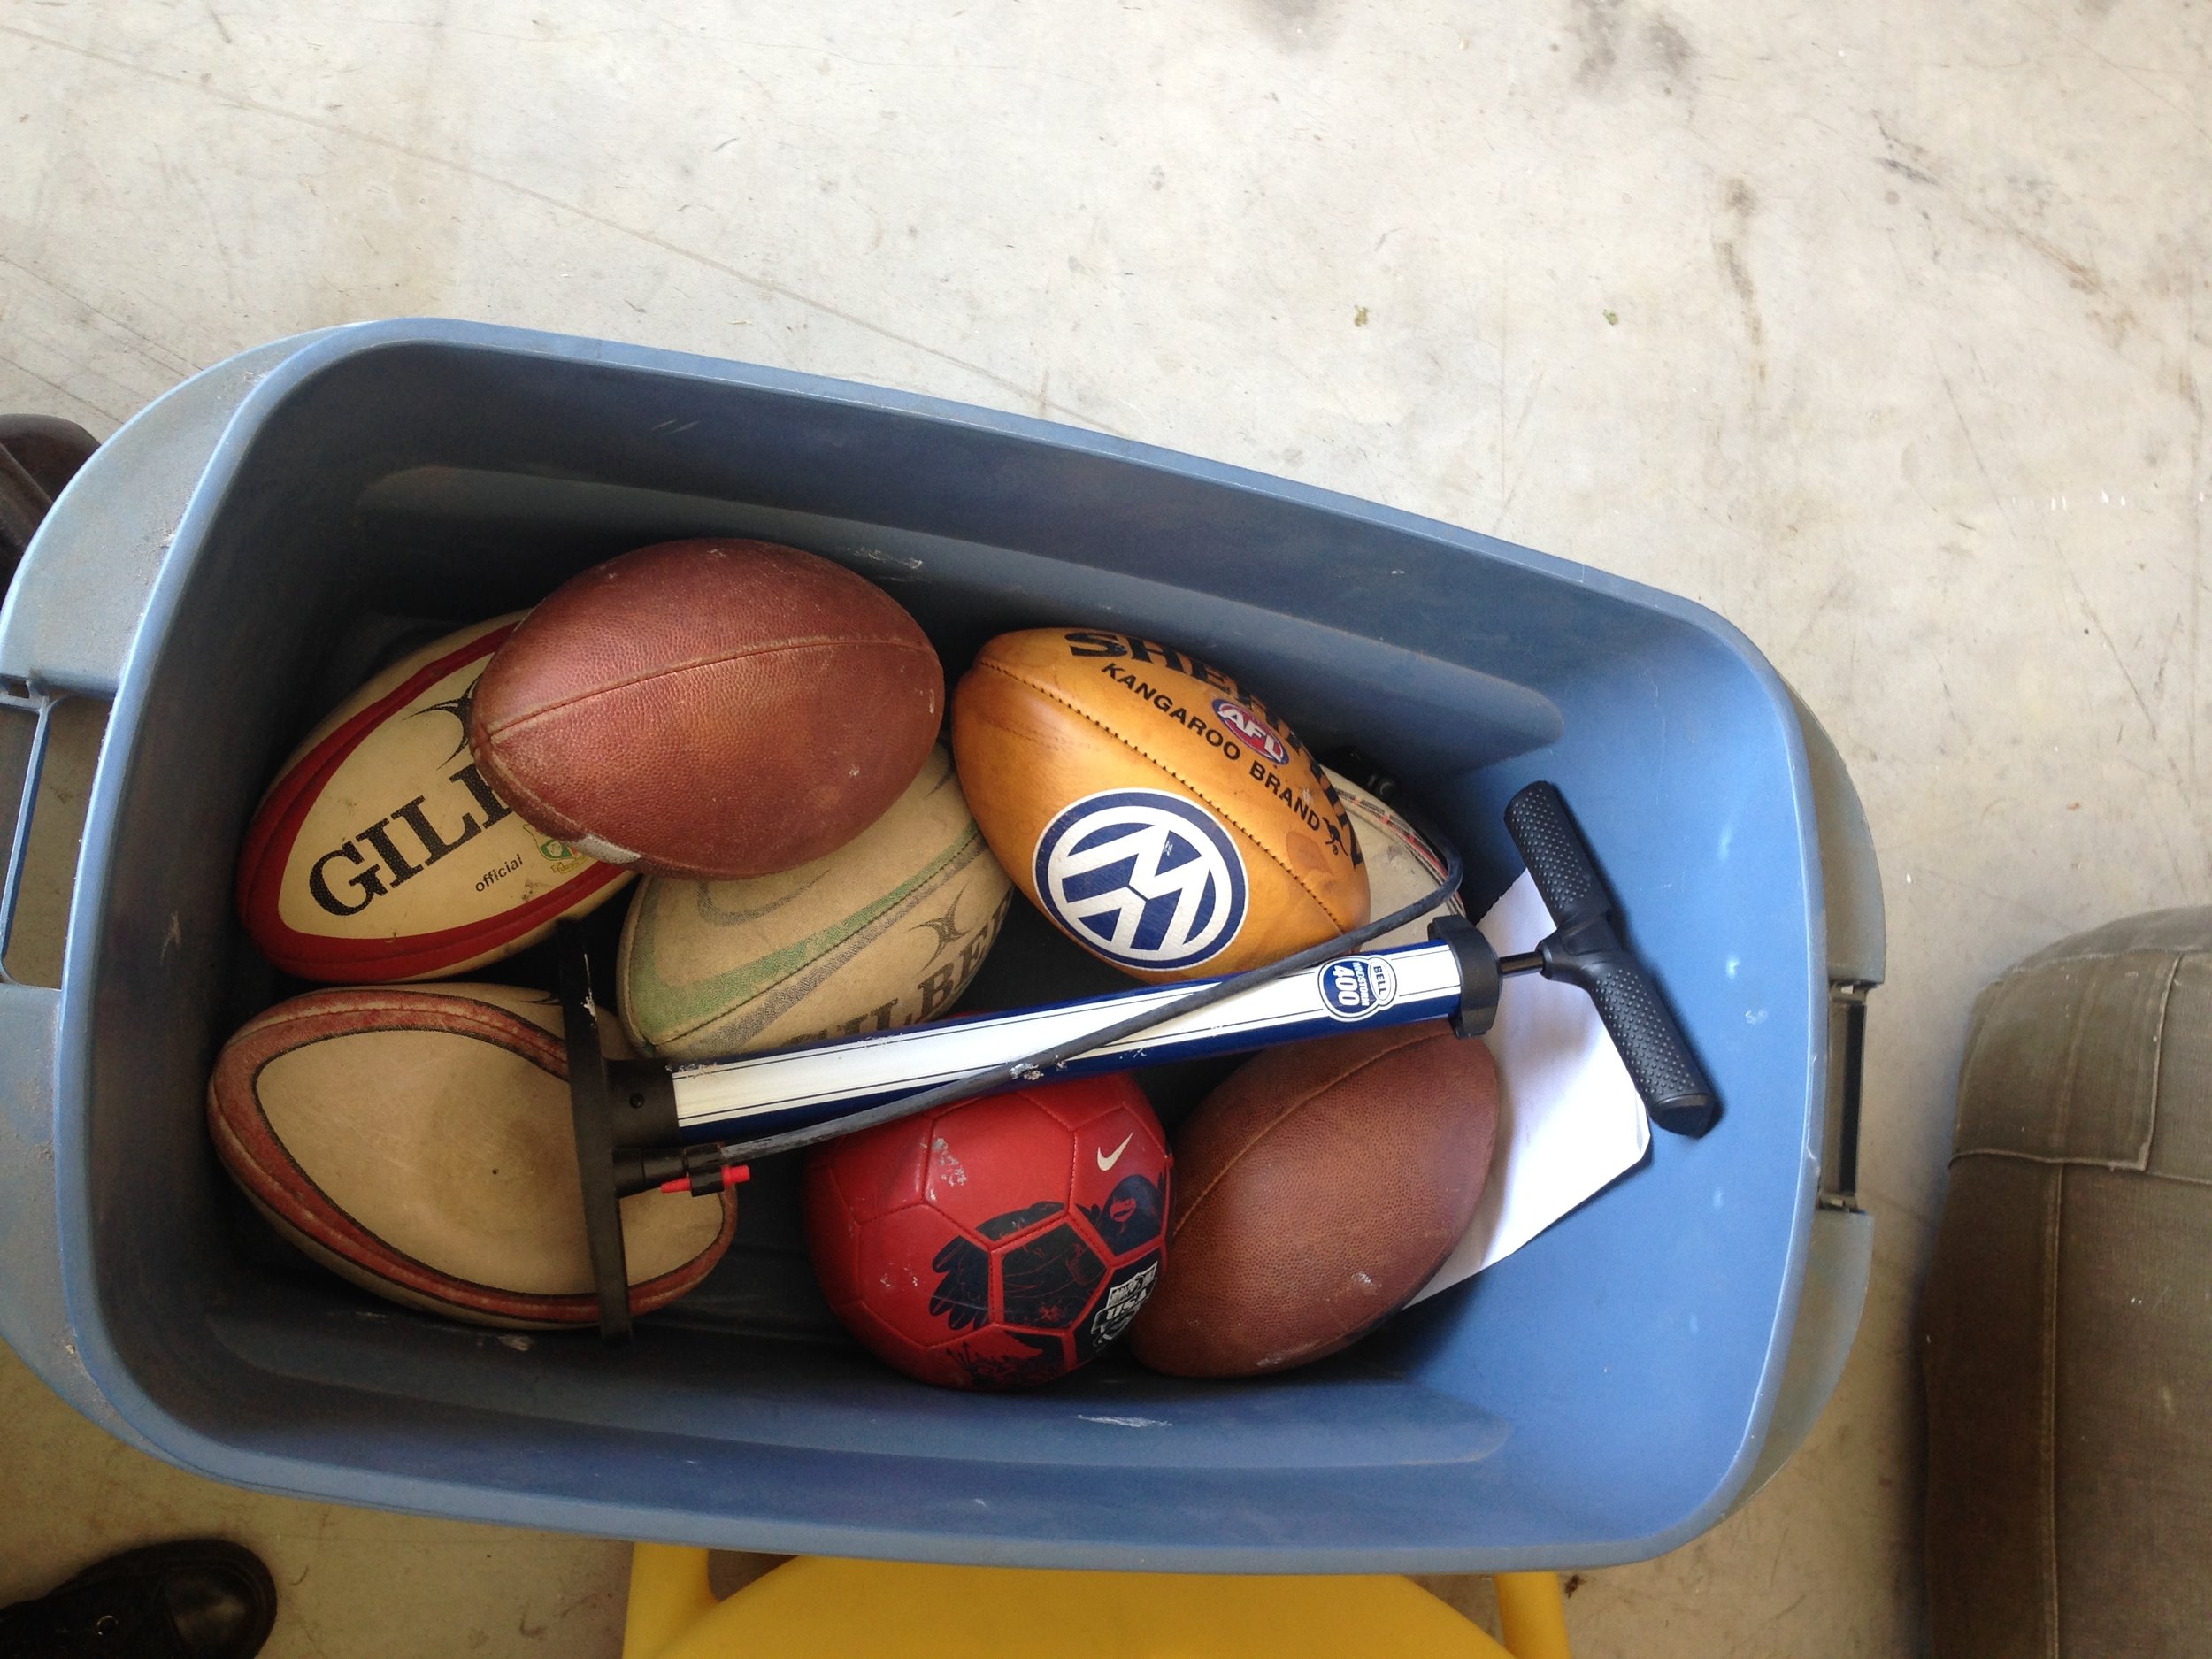 And a bucket of rugby balls.